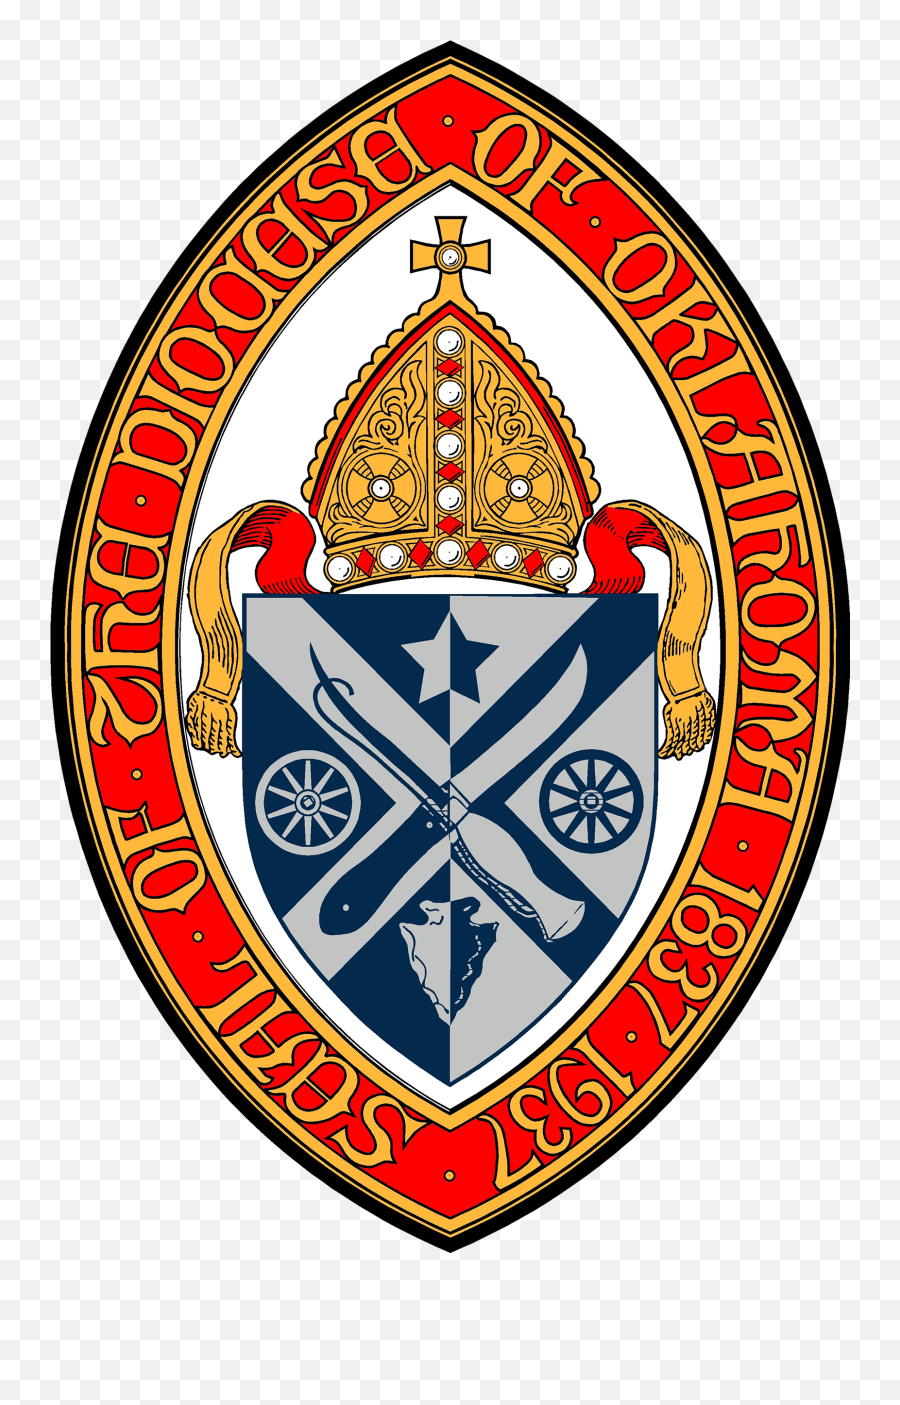 Episcopal Shield Png Transparent Background - Seal Of The Episcopal Diocese Of Oklahoma Emoji,Shield Transparent Background